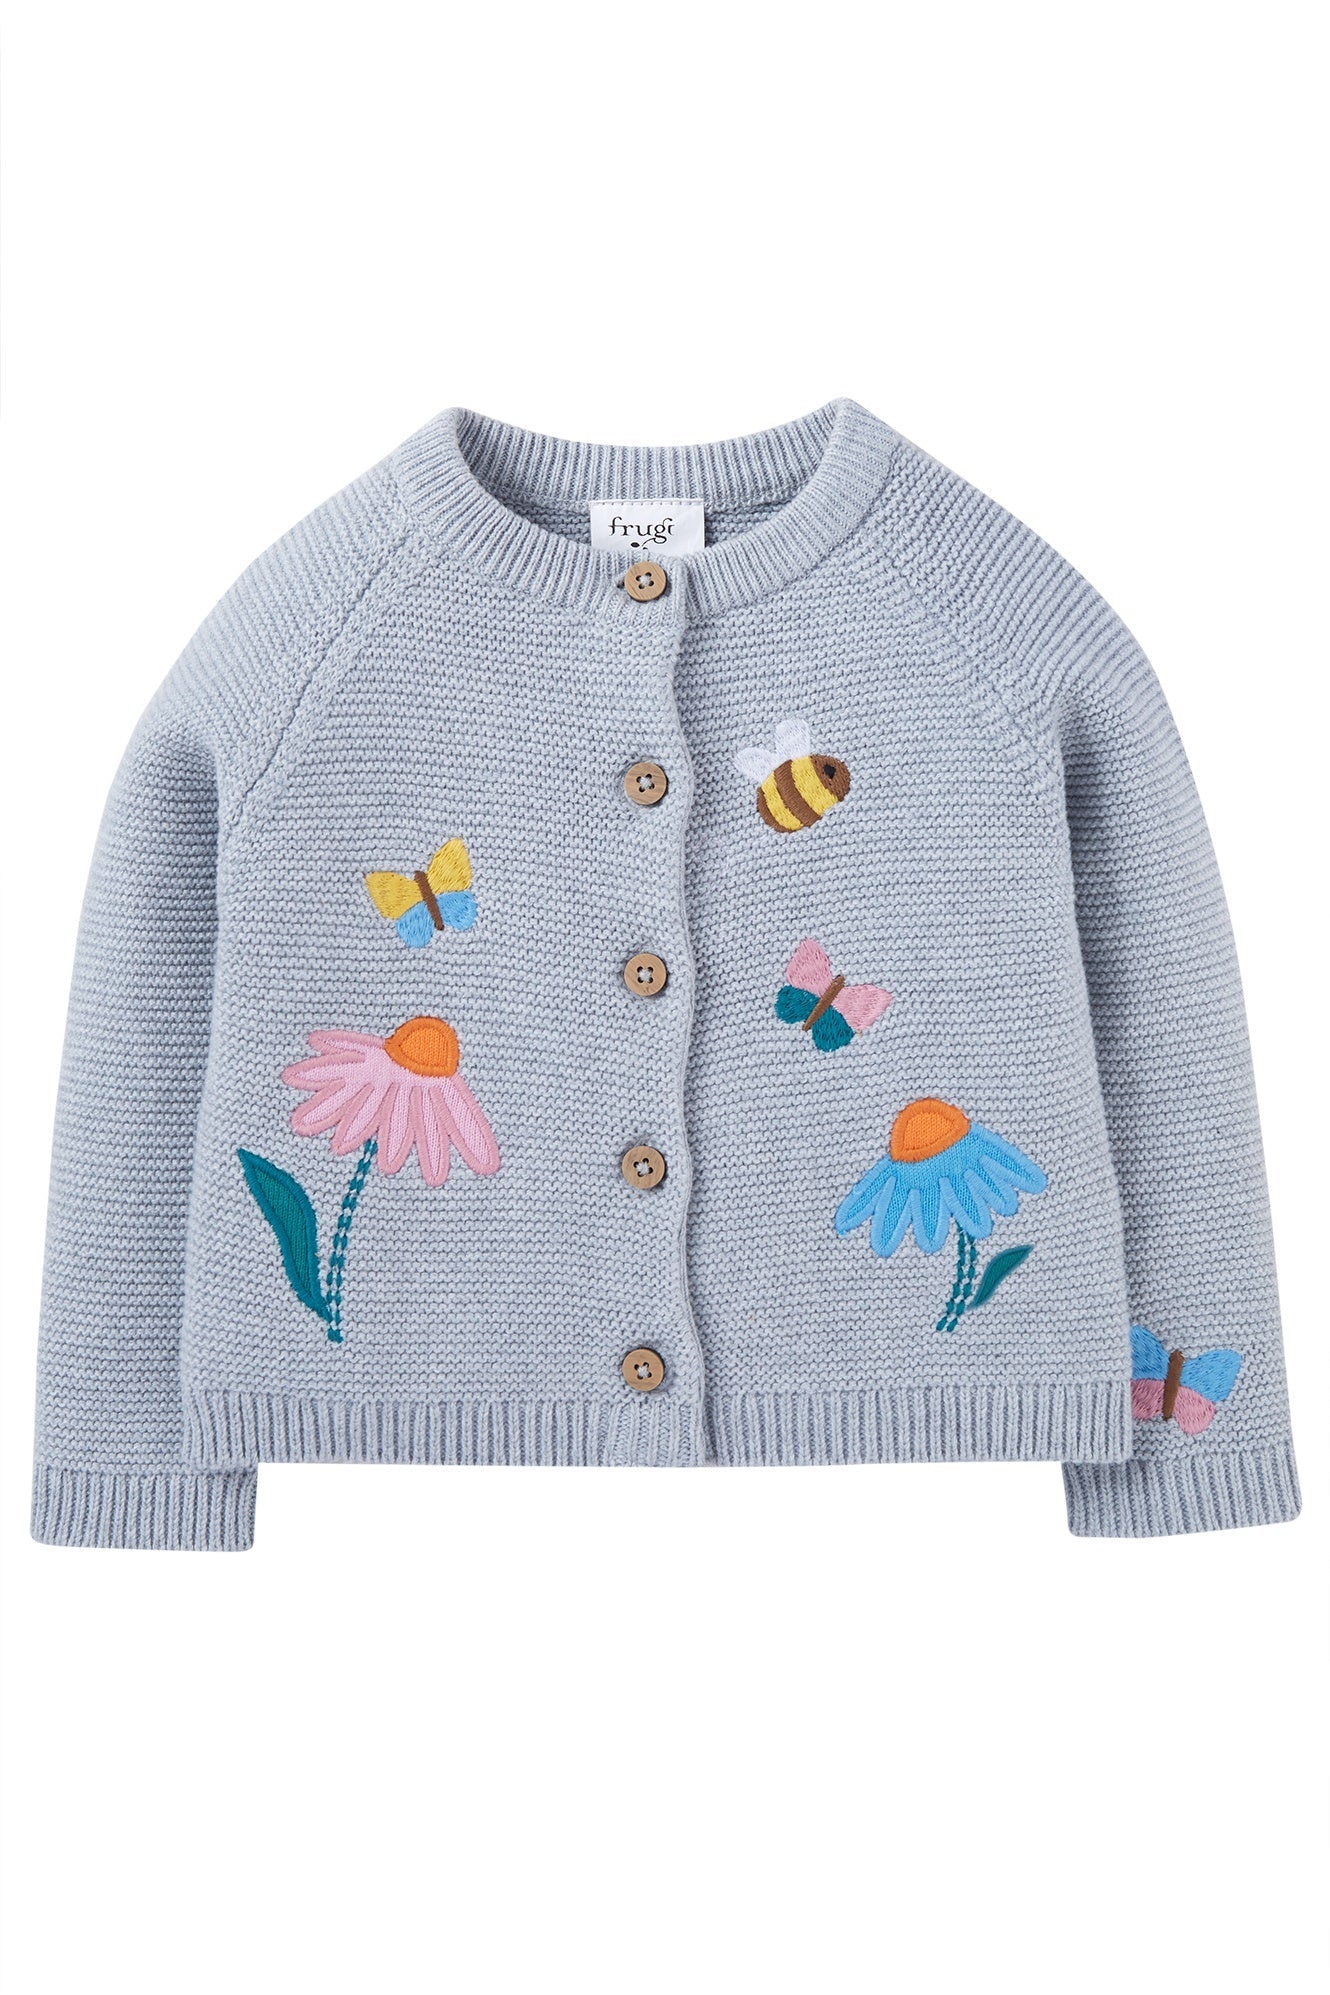 Frugi Colby Cardigan in Grey Marl/Flowers-Kids-Ohh! By Gum - Shop Sustainable